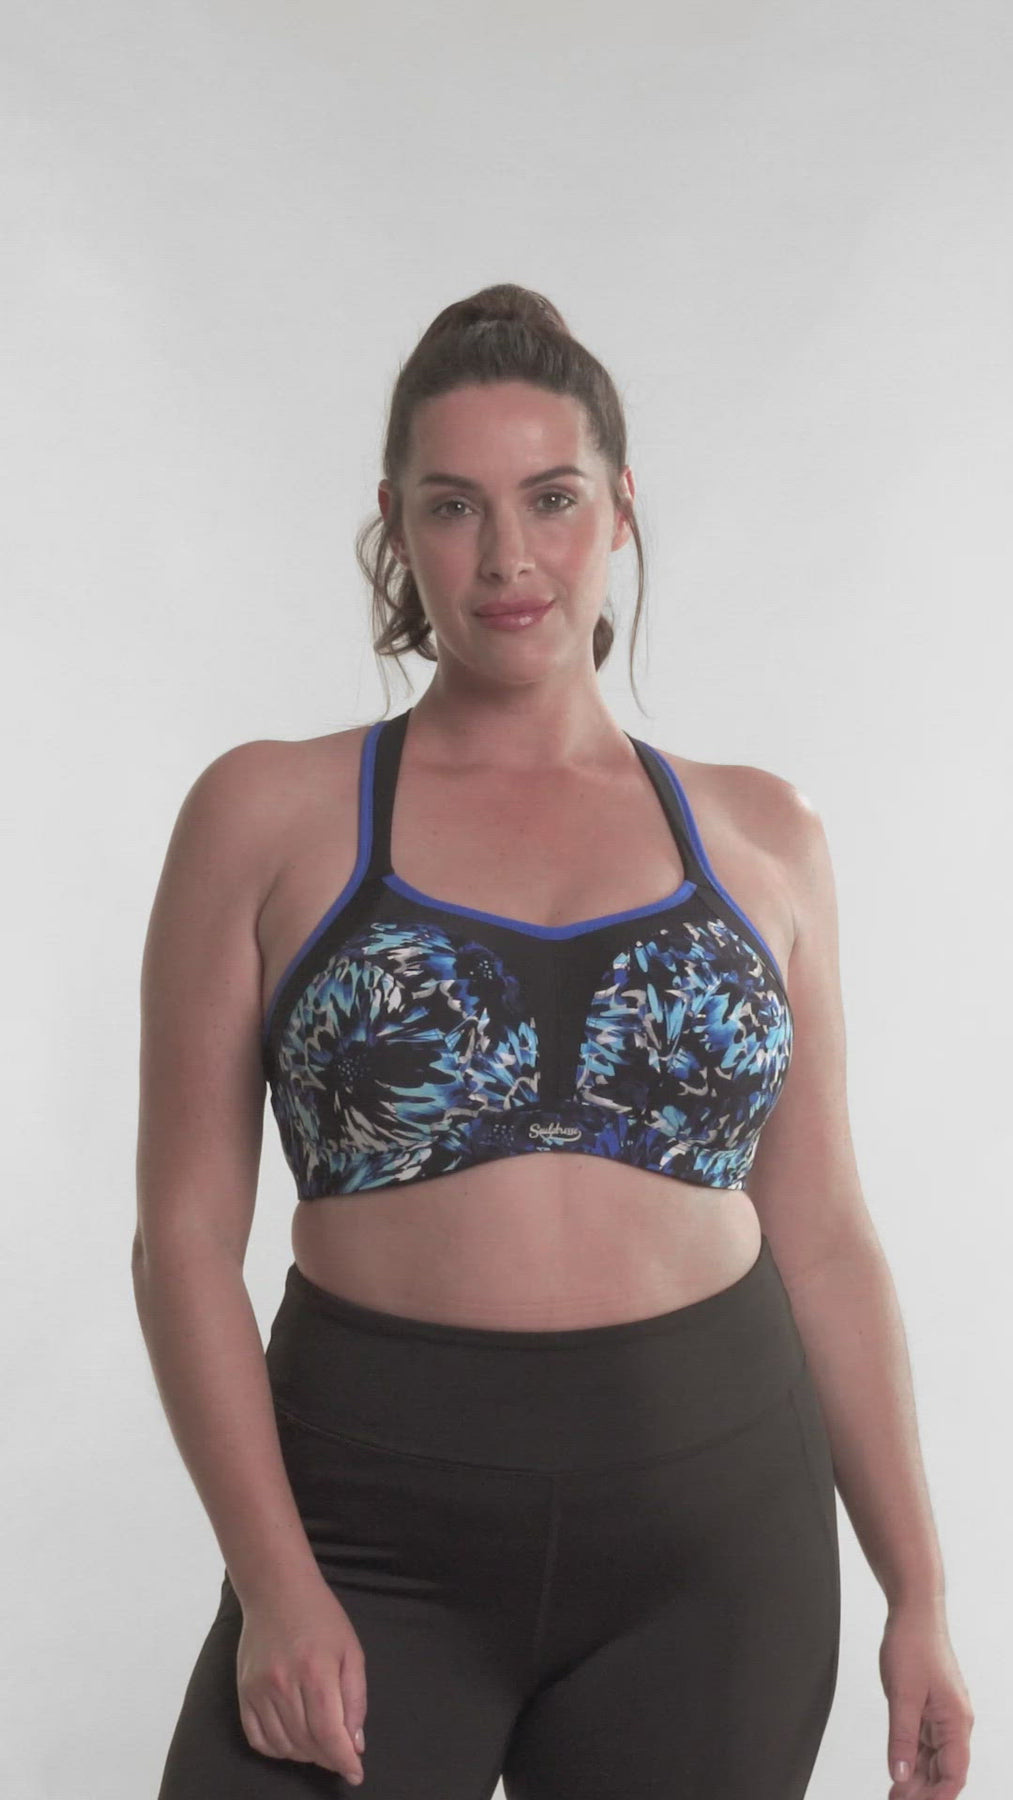 Sculptresse Sports Bra 9441  Forever Yours Lingerie in Canada